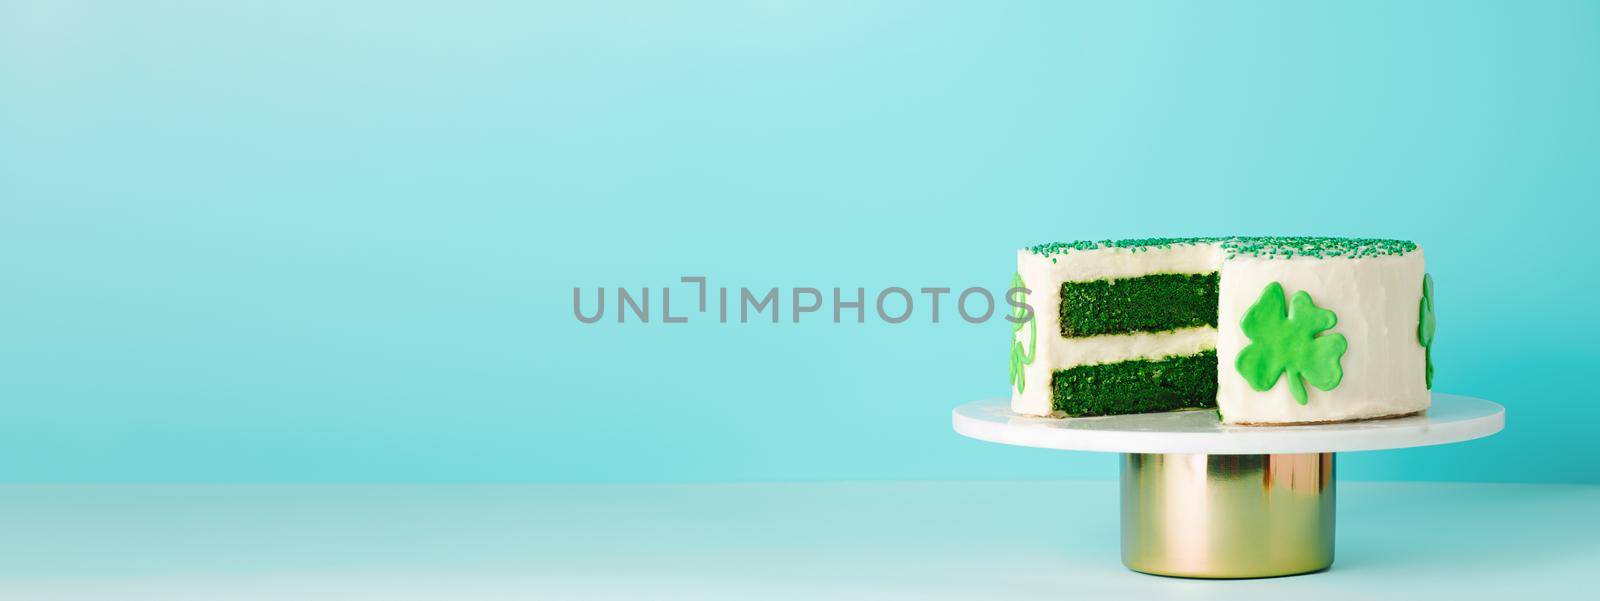 St Patricks Day sweet food concept. Green velvet cake decorated green shamrock leaves for Saint Patrick's Day party on blue background. Copy space. Long horizontal banner